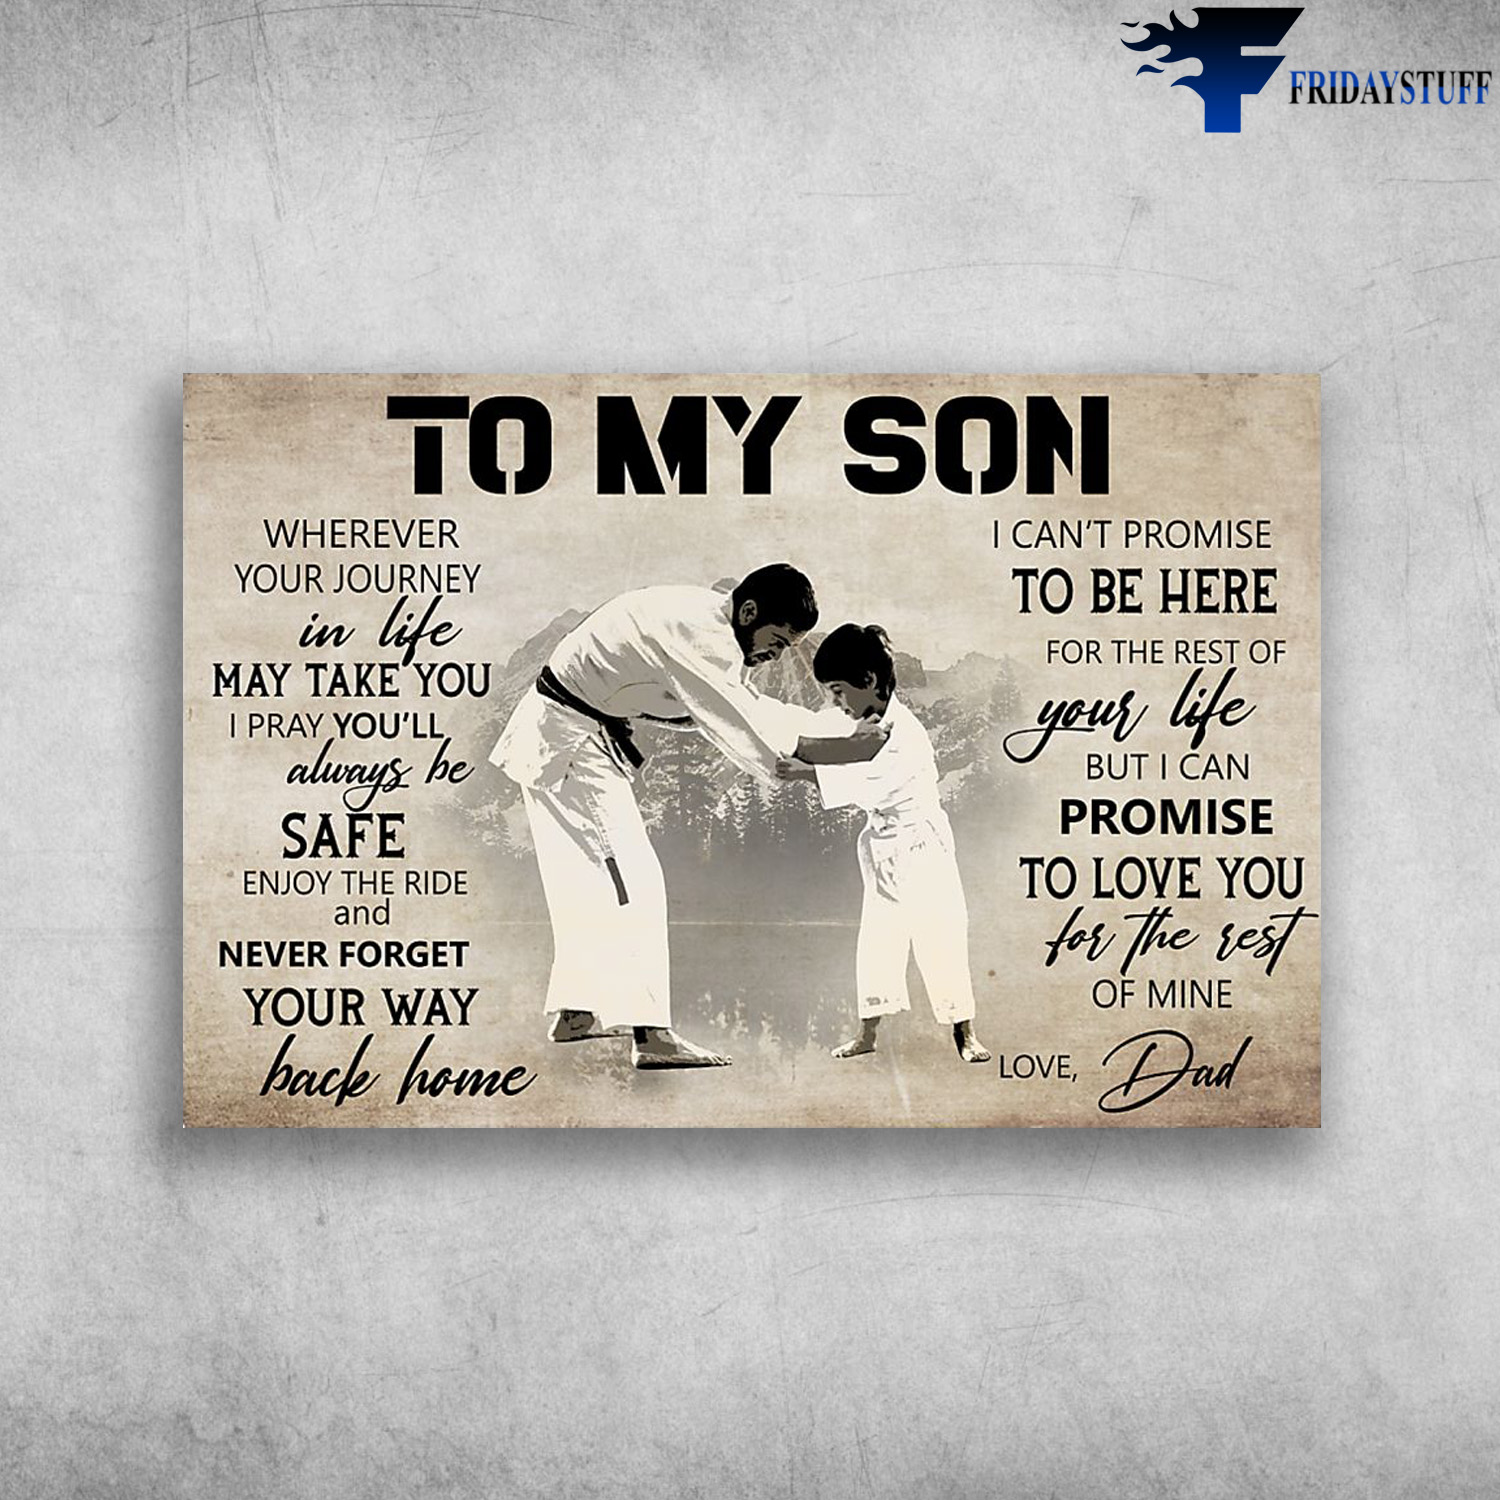 Dad And Son Karate – To My Son, Wherever Your Journey In Life May Take You, I Pray You’ll Always Be Safe, Enjoy The Ride And Never Forget Your Way Back Home, I Can’t Promise To Be Here For The Rest Of Your Life